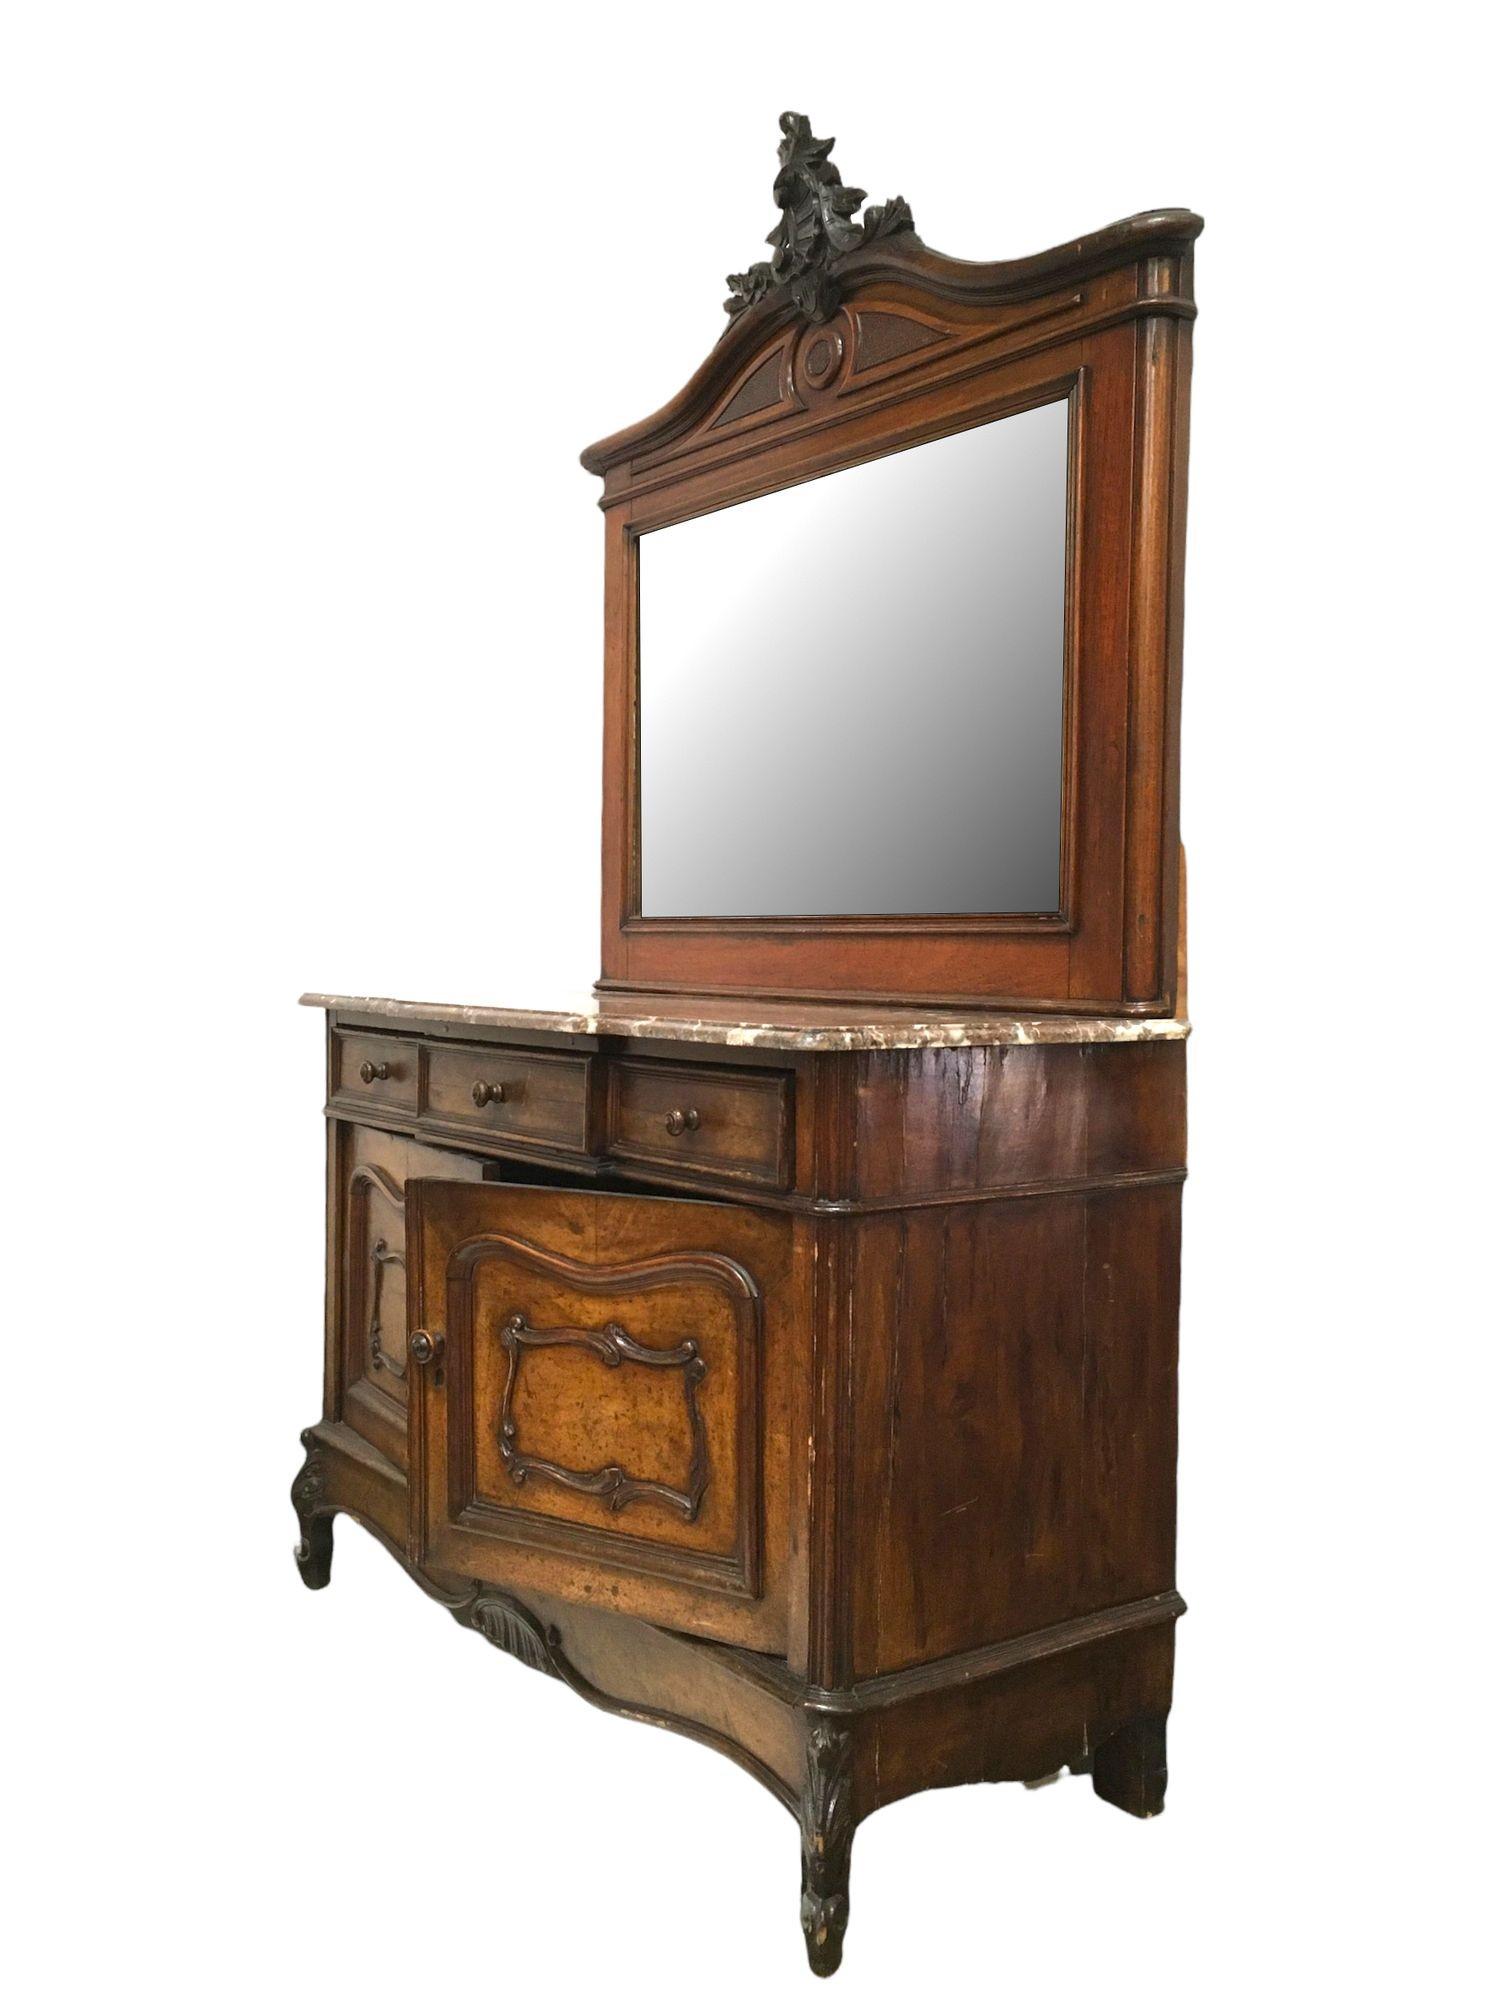 Vintage Solid Oak Dressing Table / Vanity with Marble Top
 
This solid oak piece of furniture can serve as either a dressing or a vanity table. Featuring gorgeous carvings throughout and a nice mirror with beveled edges. Its marble top has a